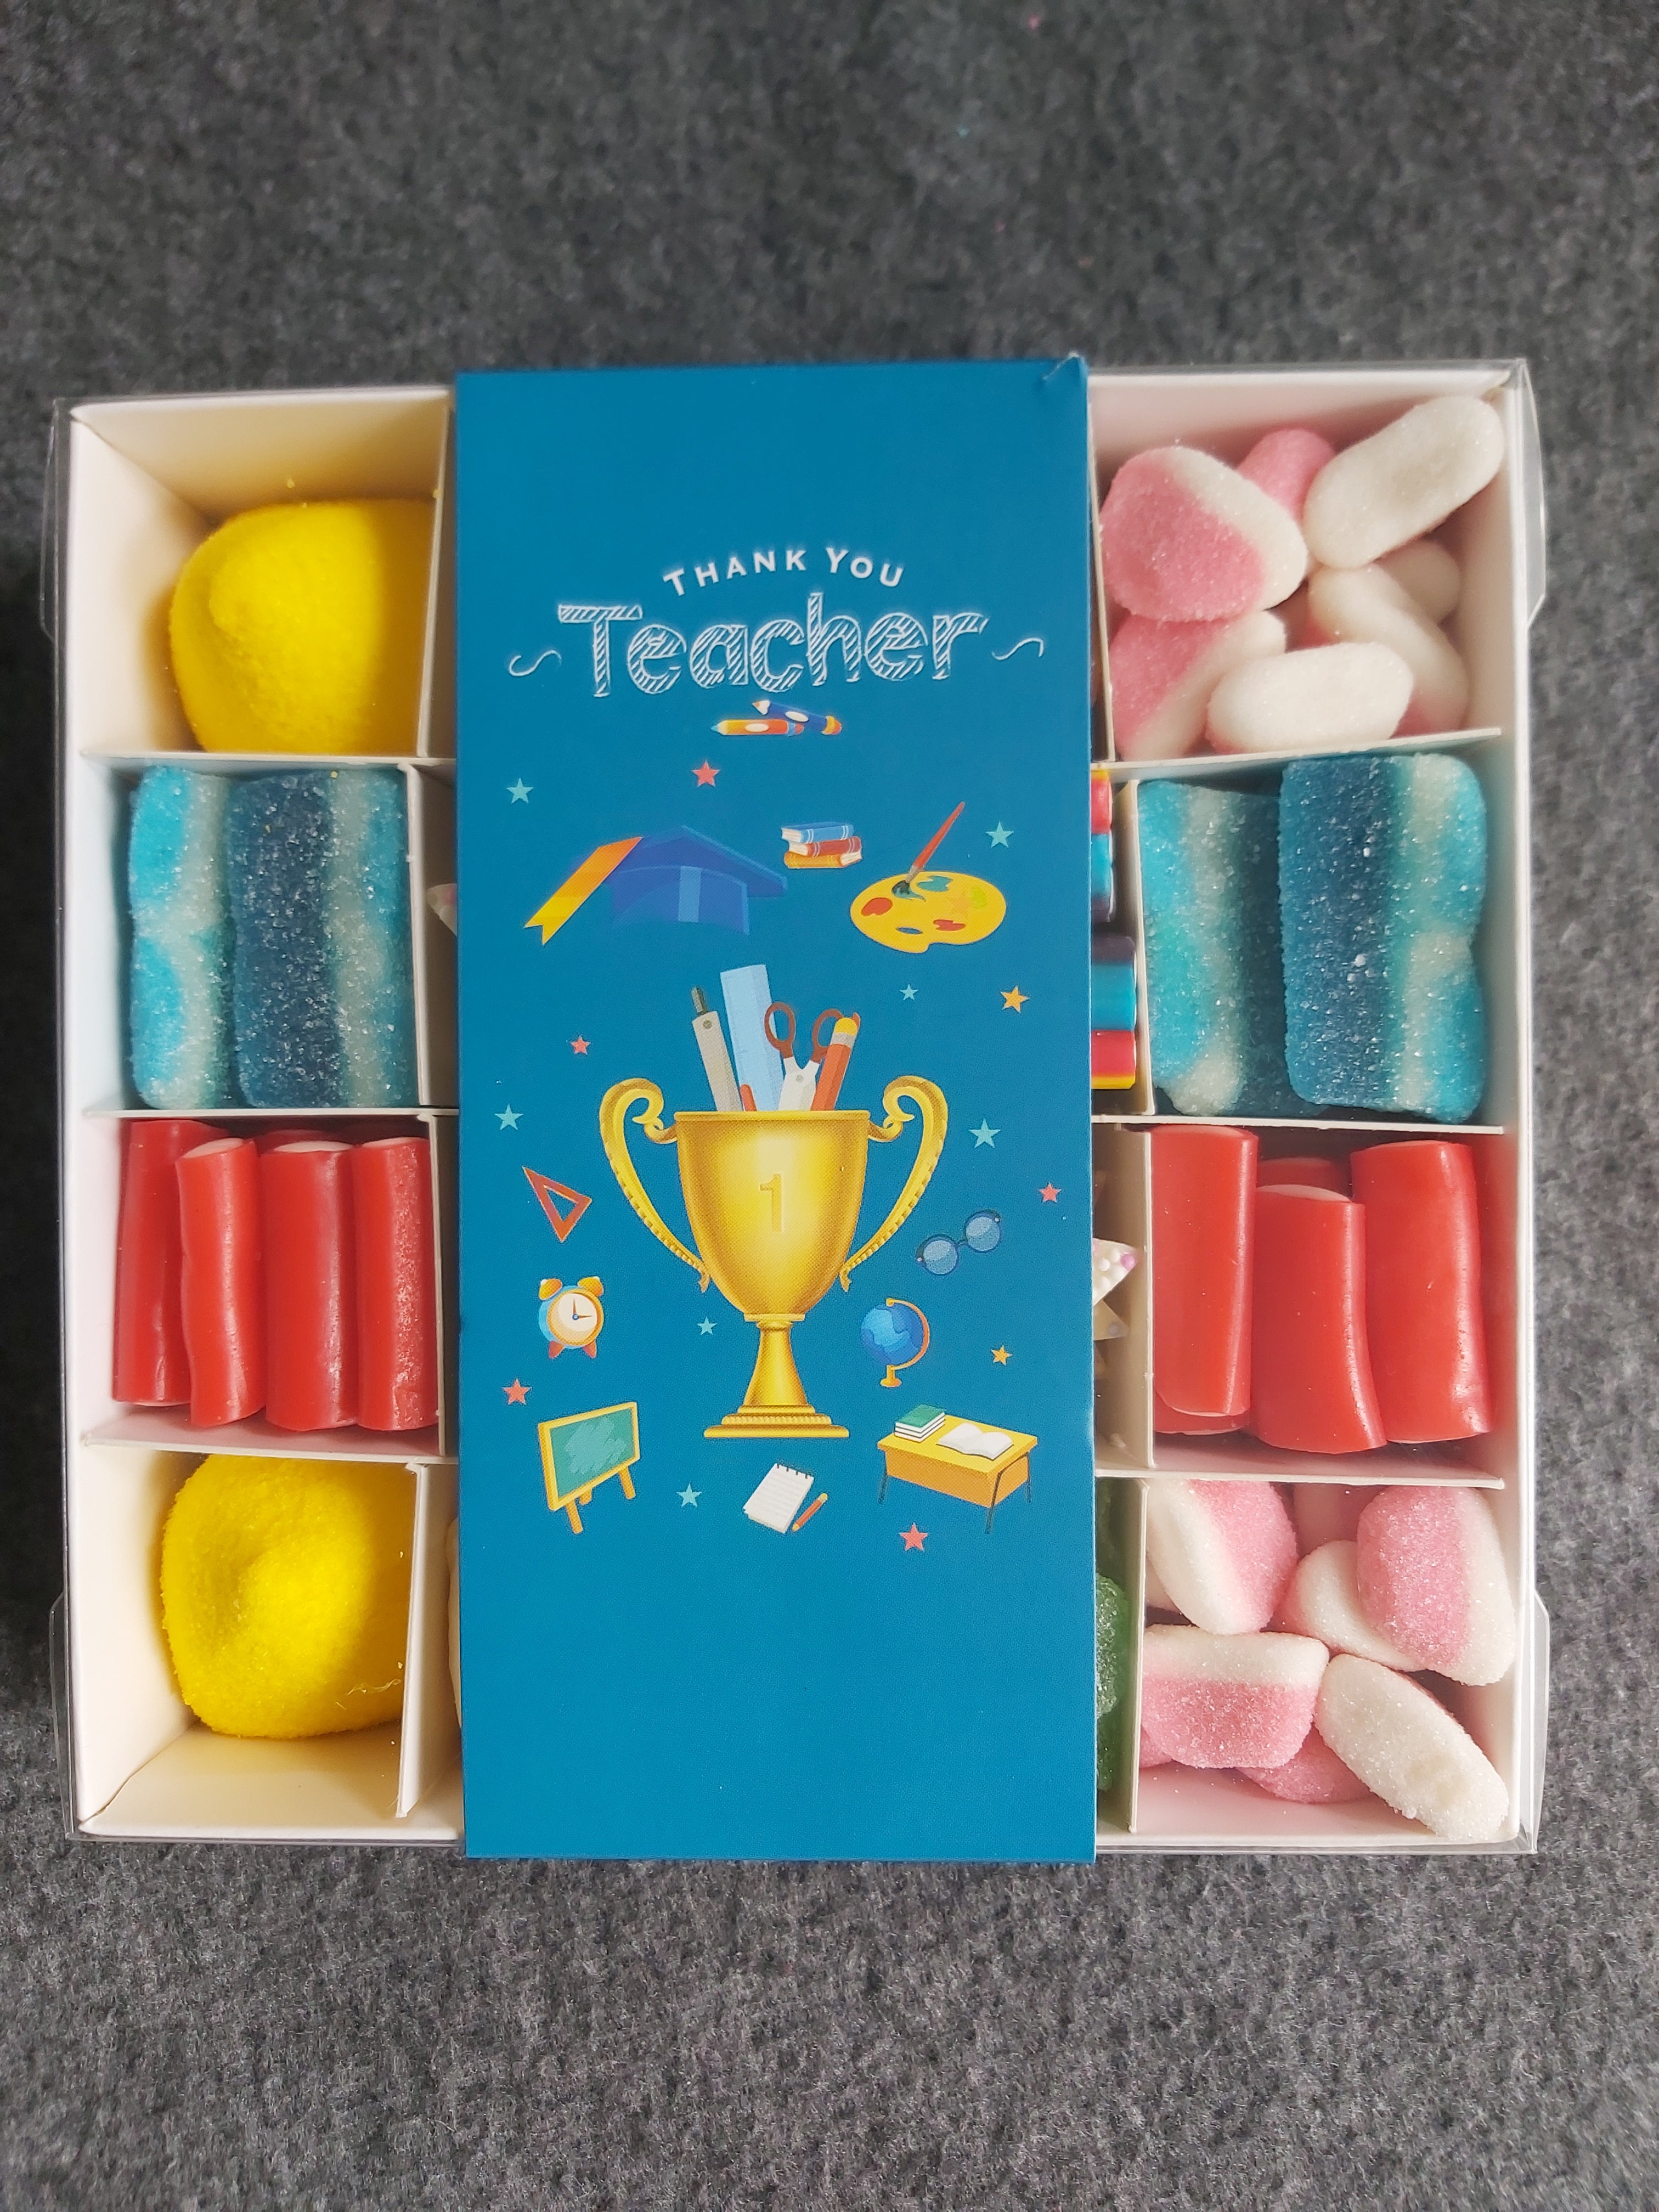 Thank You Teacher Sweets Selection Box – Sweet Cones & Candy Floss